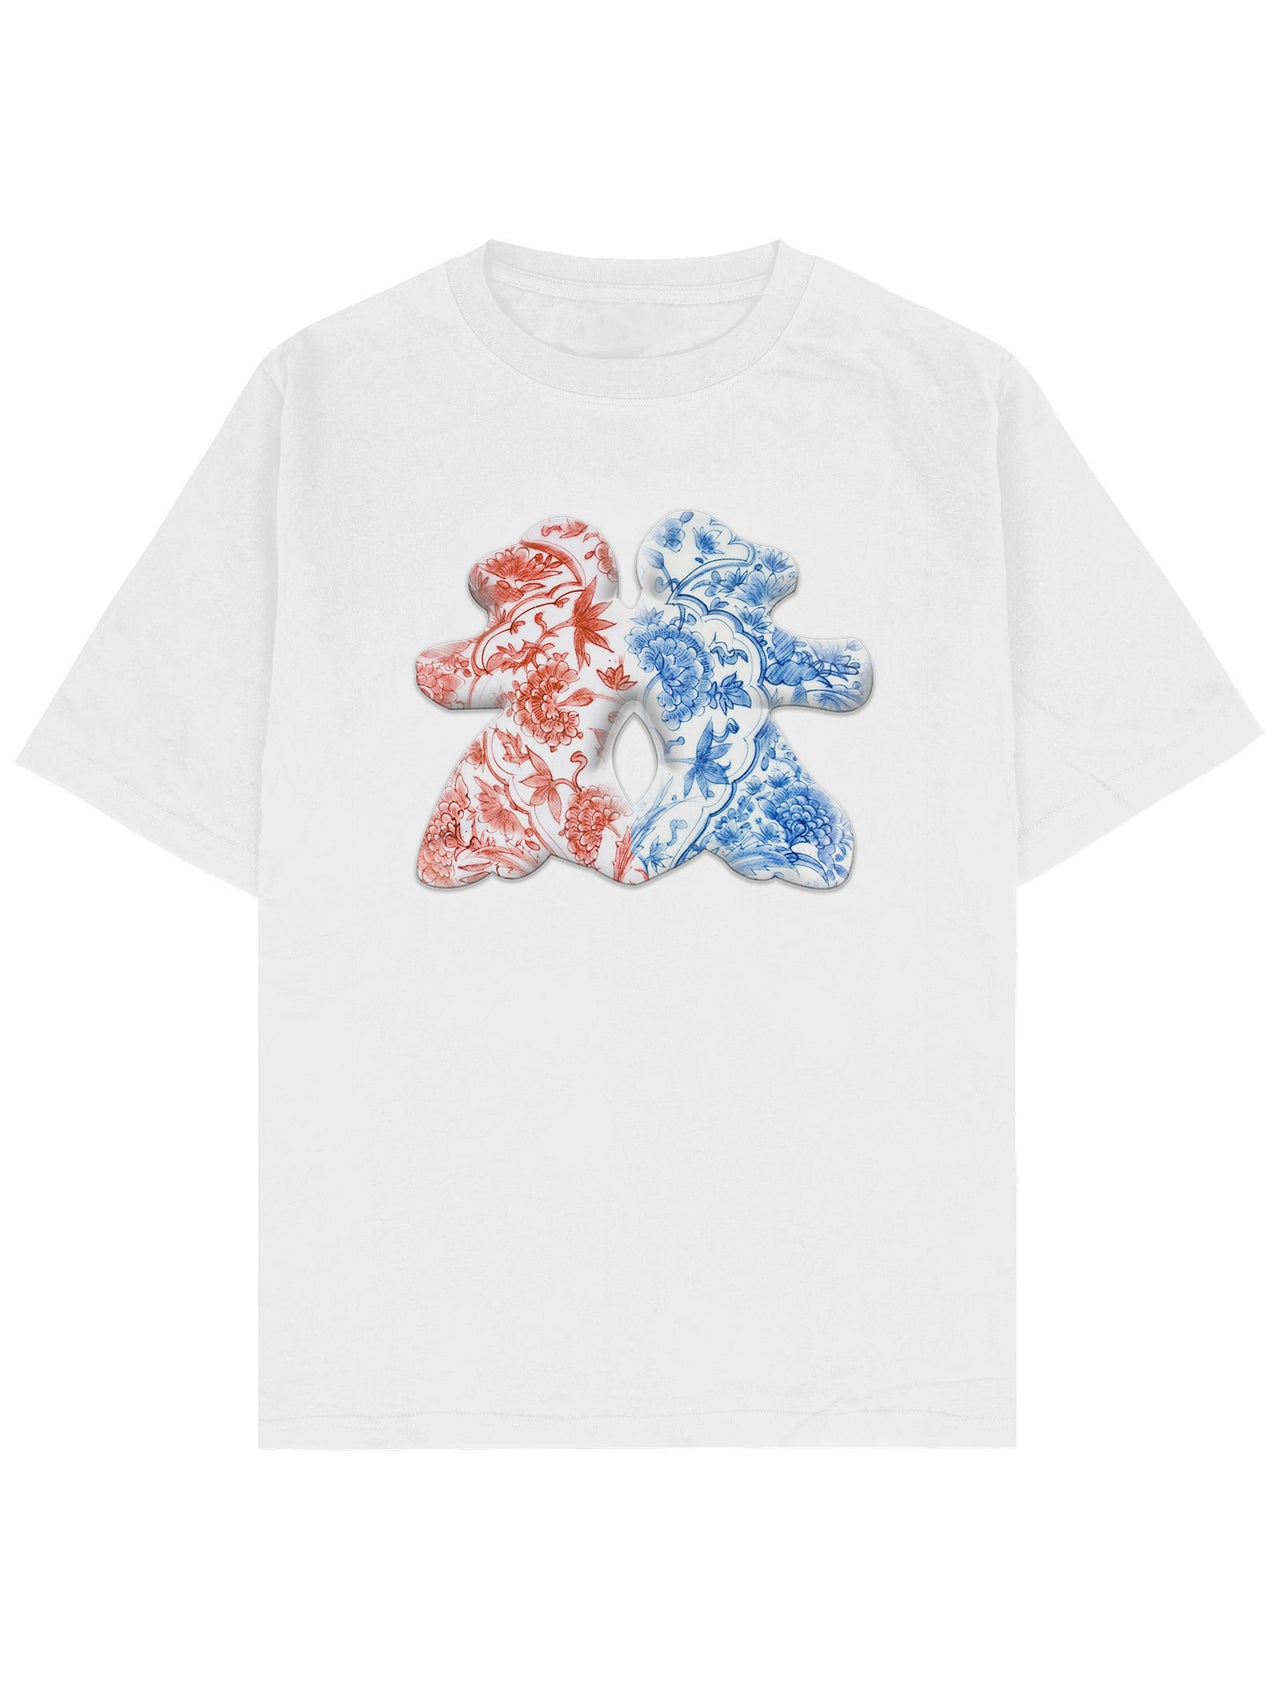 Two Souls Ceramic Edition Oversize Tee